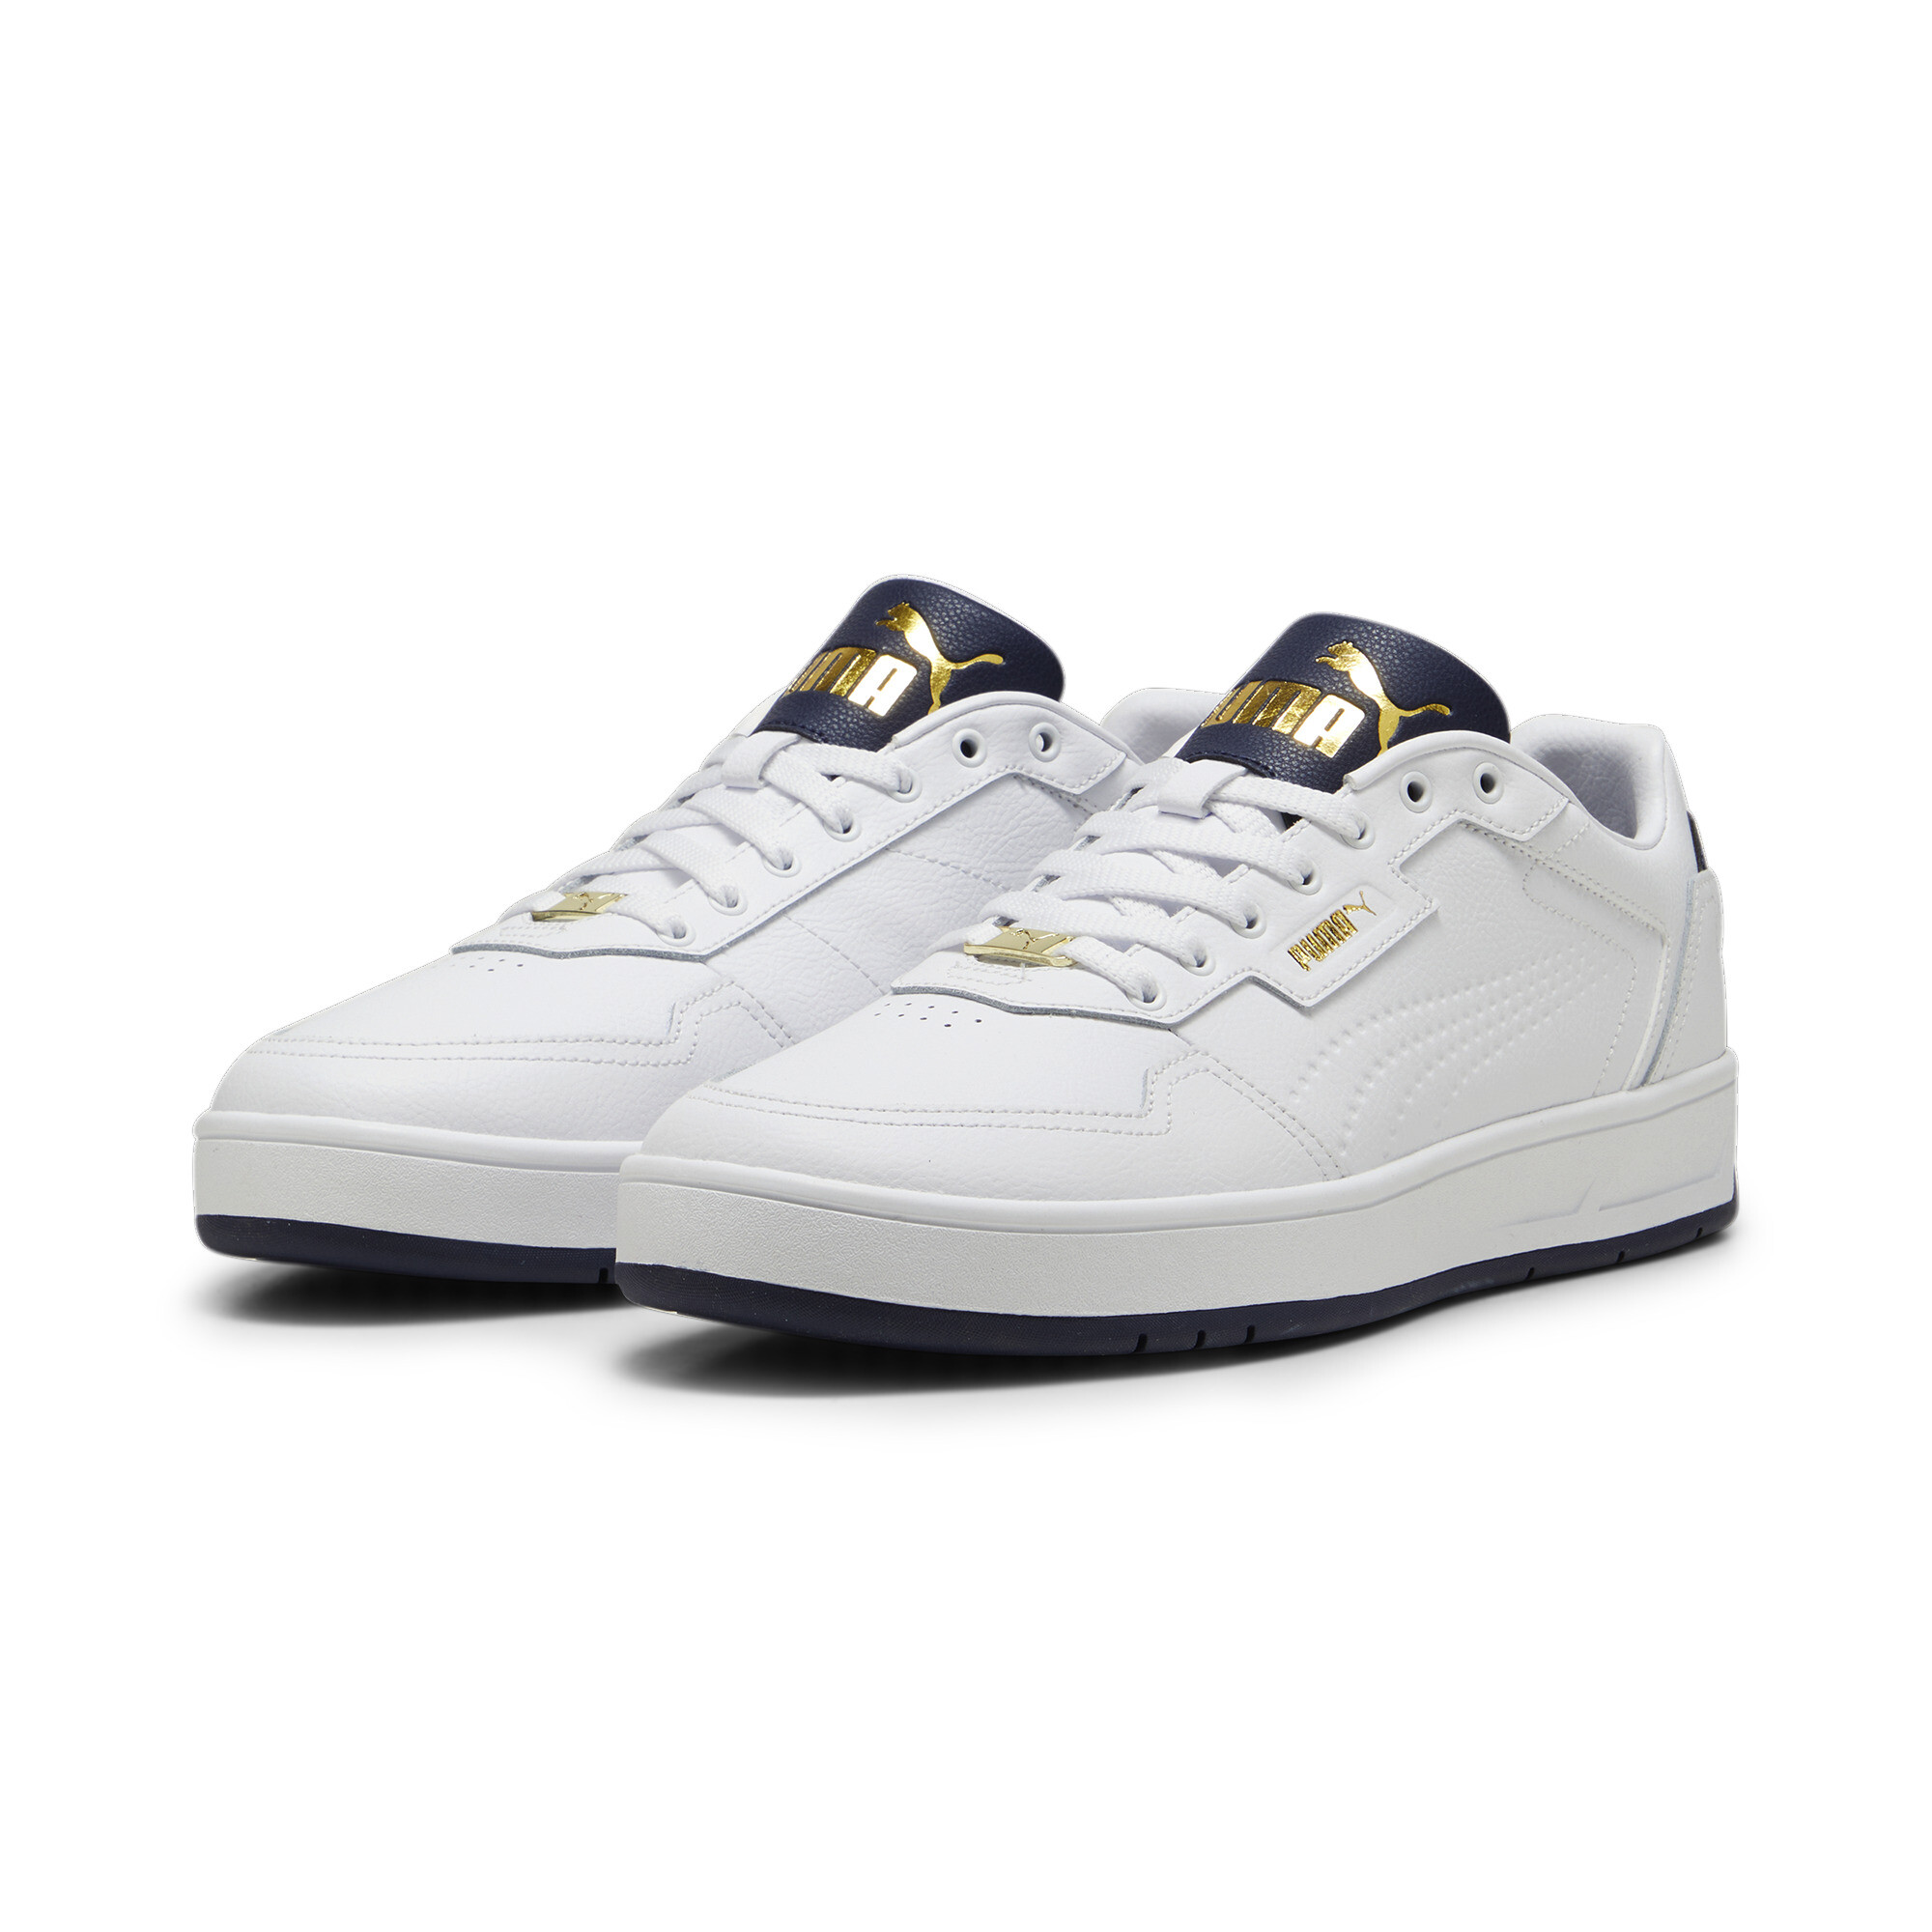 Puma Court Classic Lux Sneakers, White, Size 35.5, Shoes